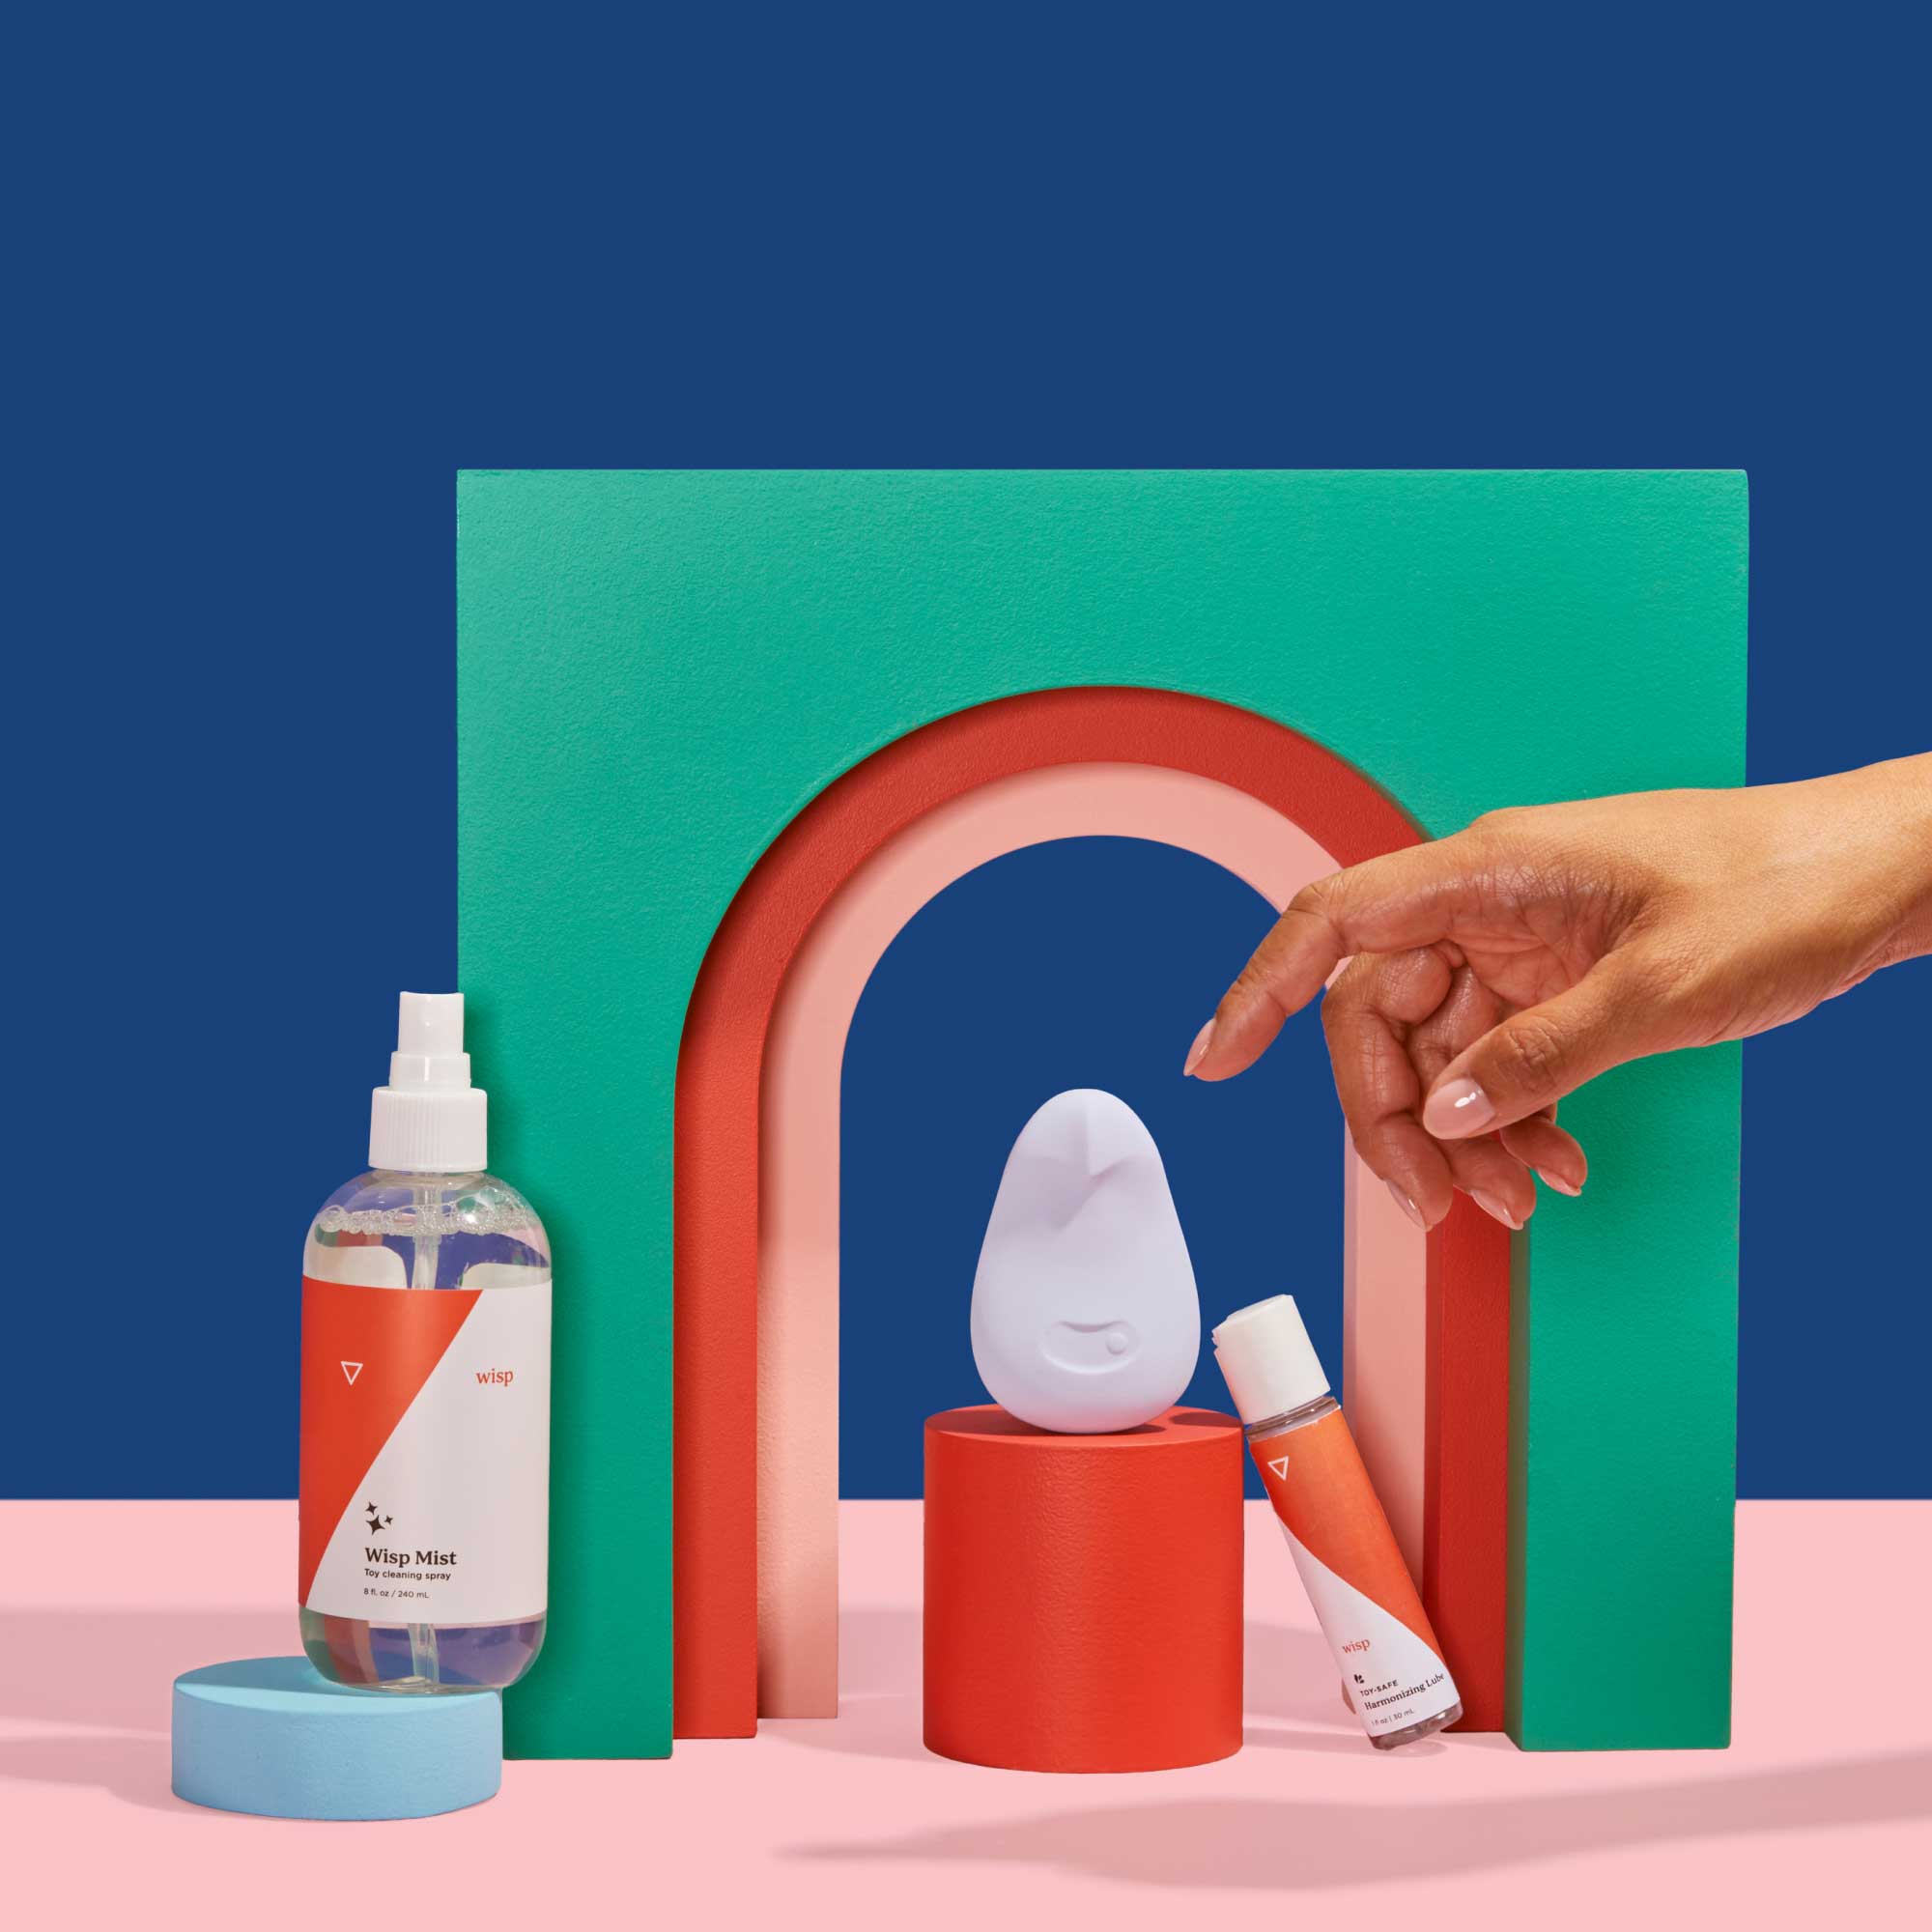 Hand reaching for Wisp Mist, Toy-Safe Lube, and Pom by Dame with colorful abstract shapes on a blue and pink background